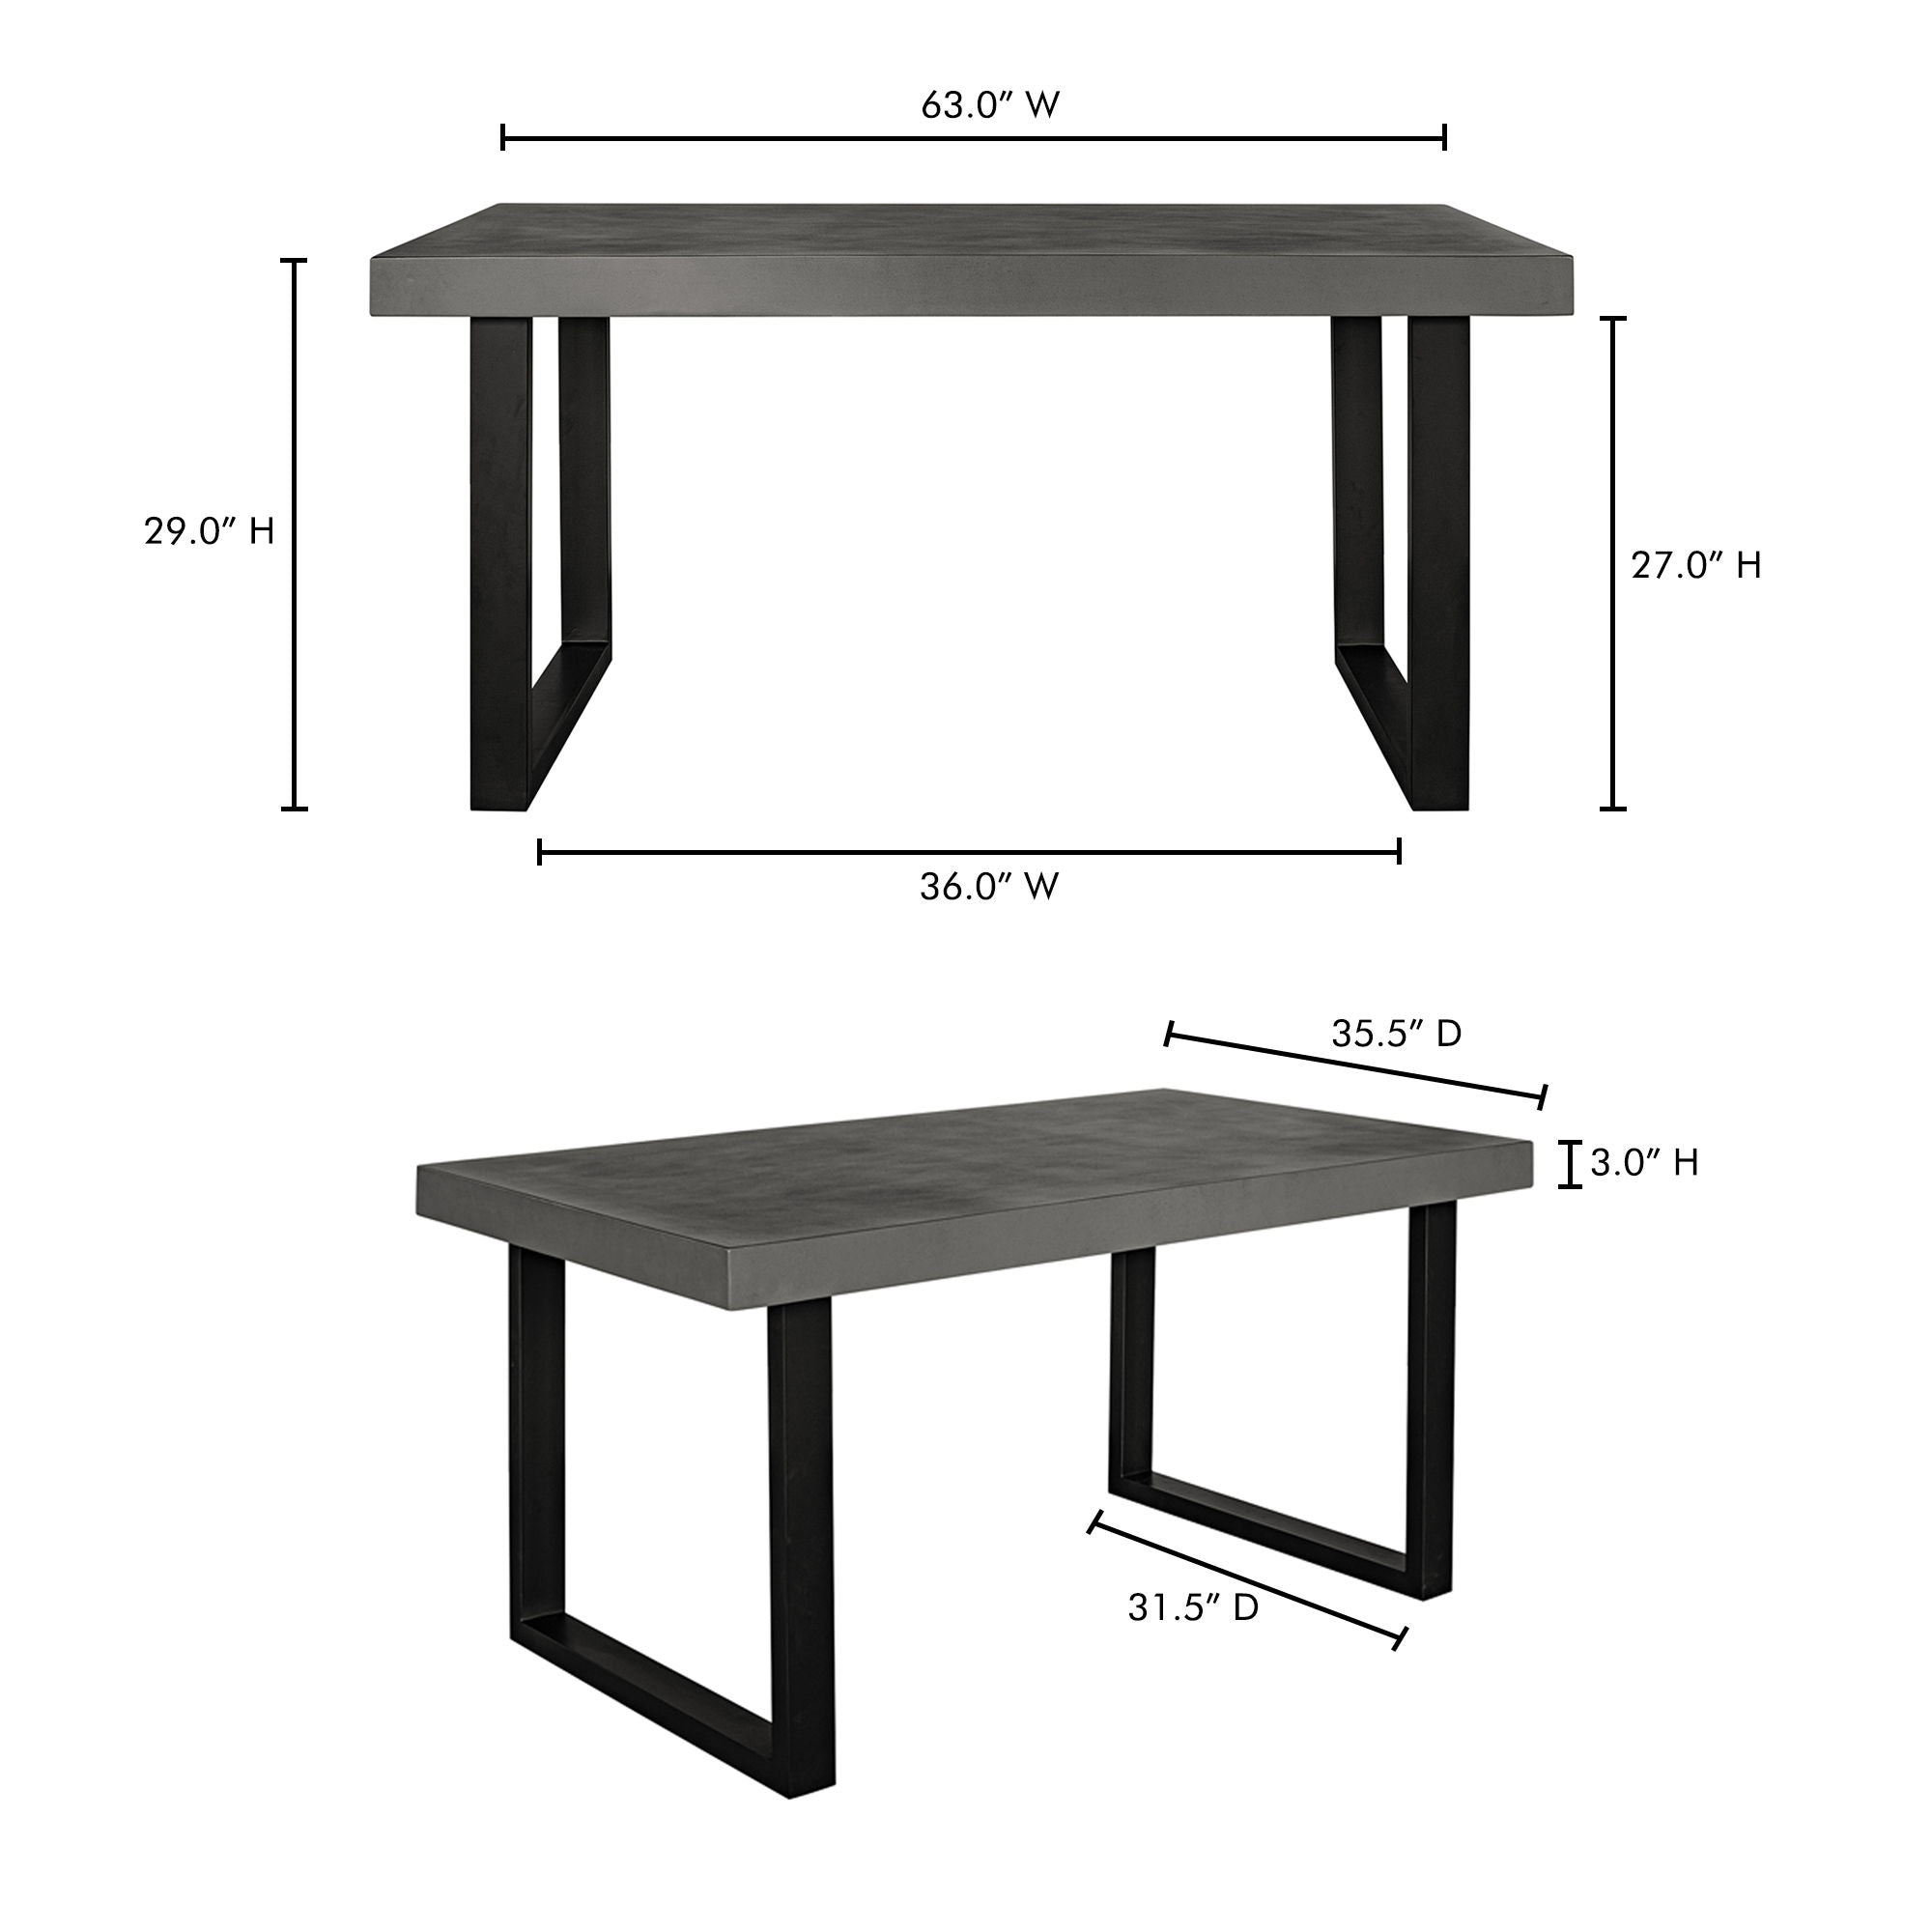 Jedrik - Outdoor Dining Table Small - Cement